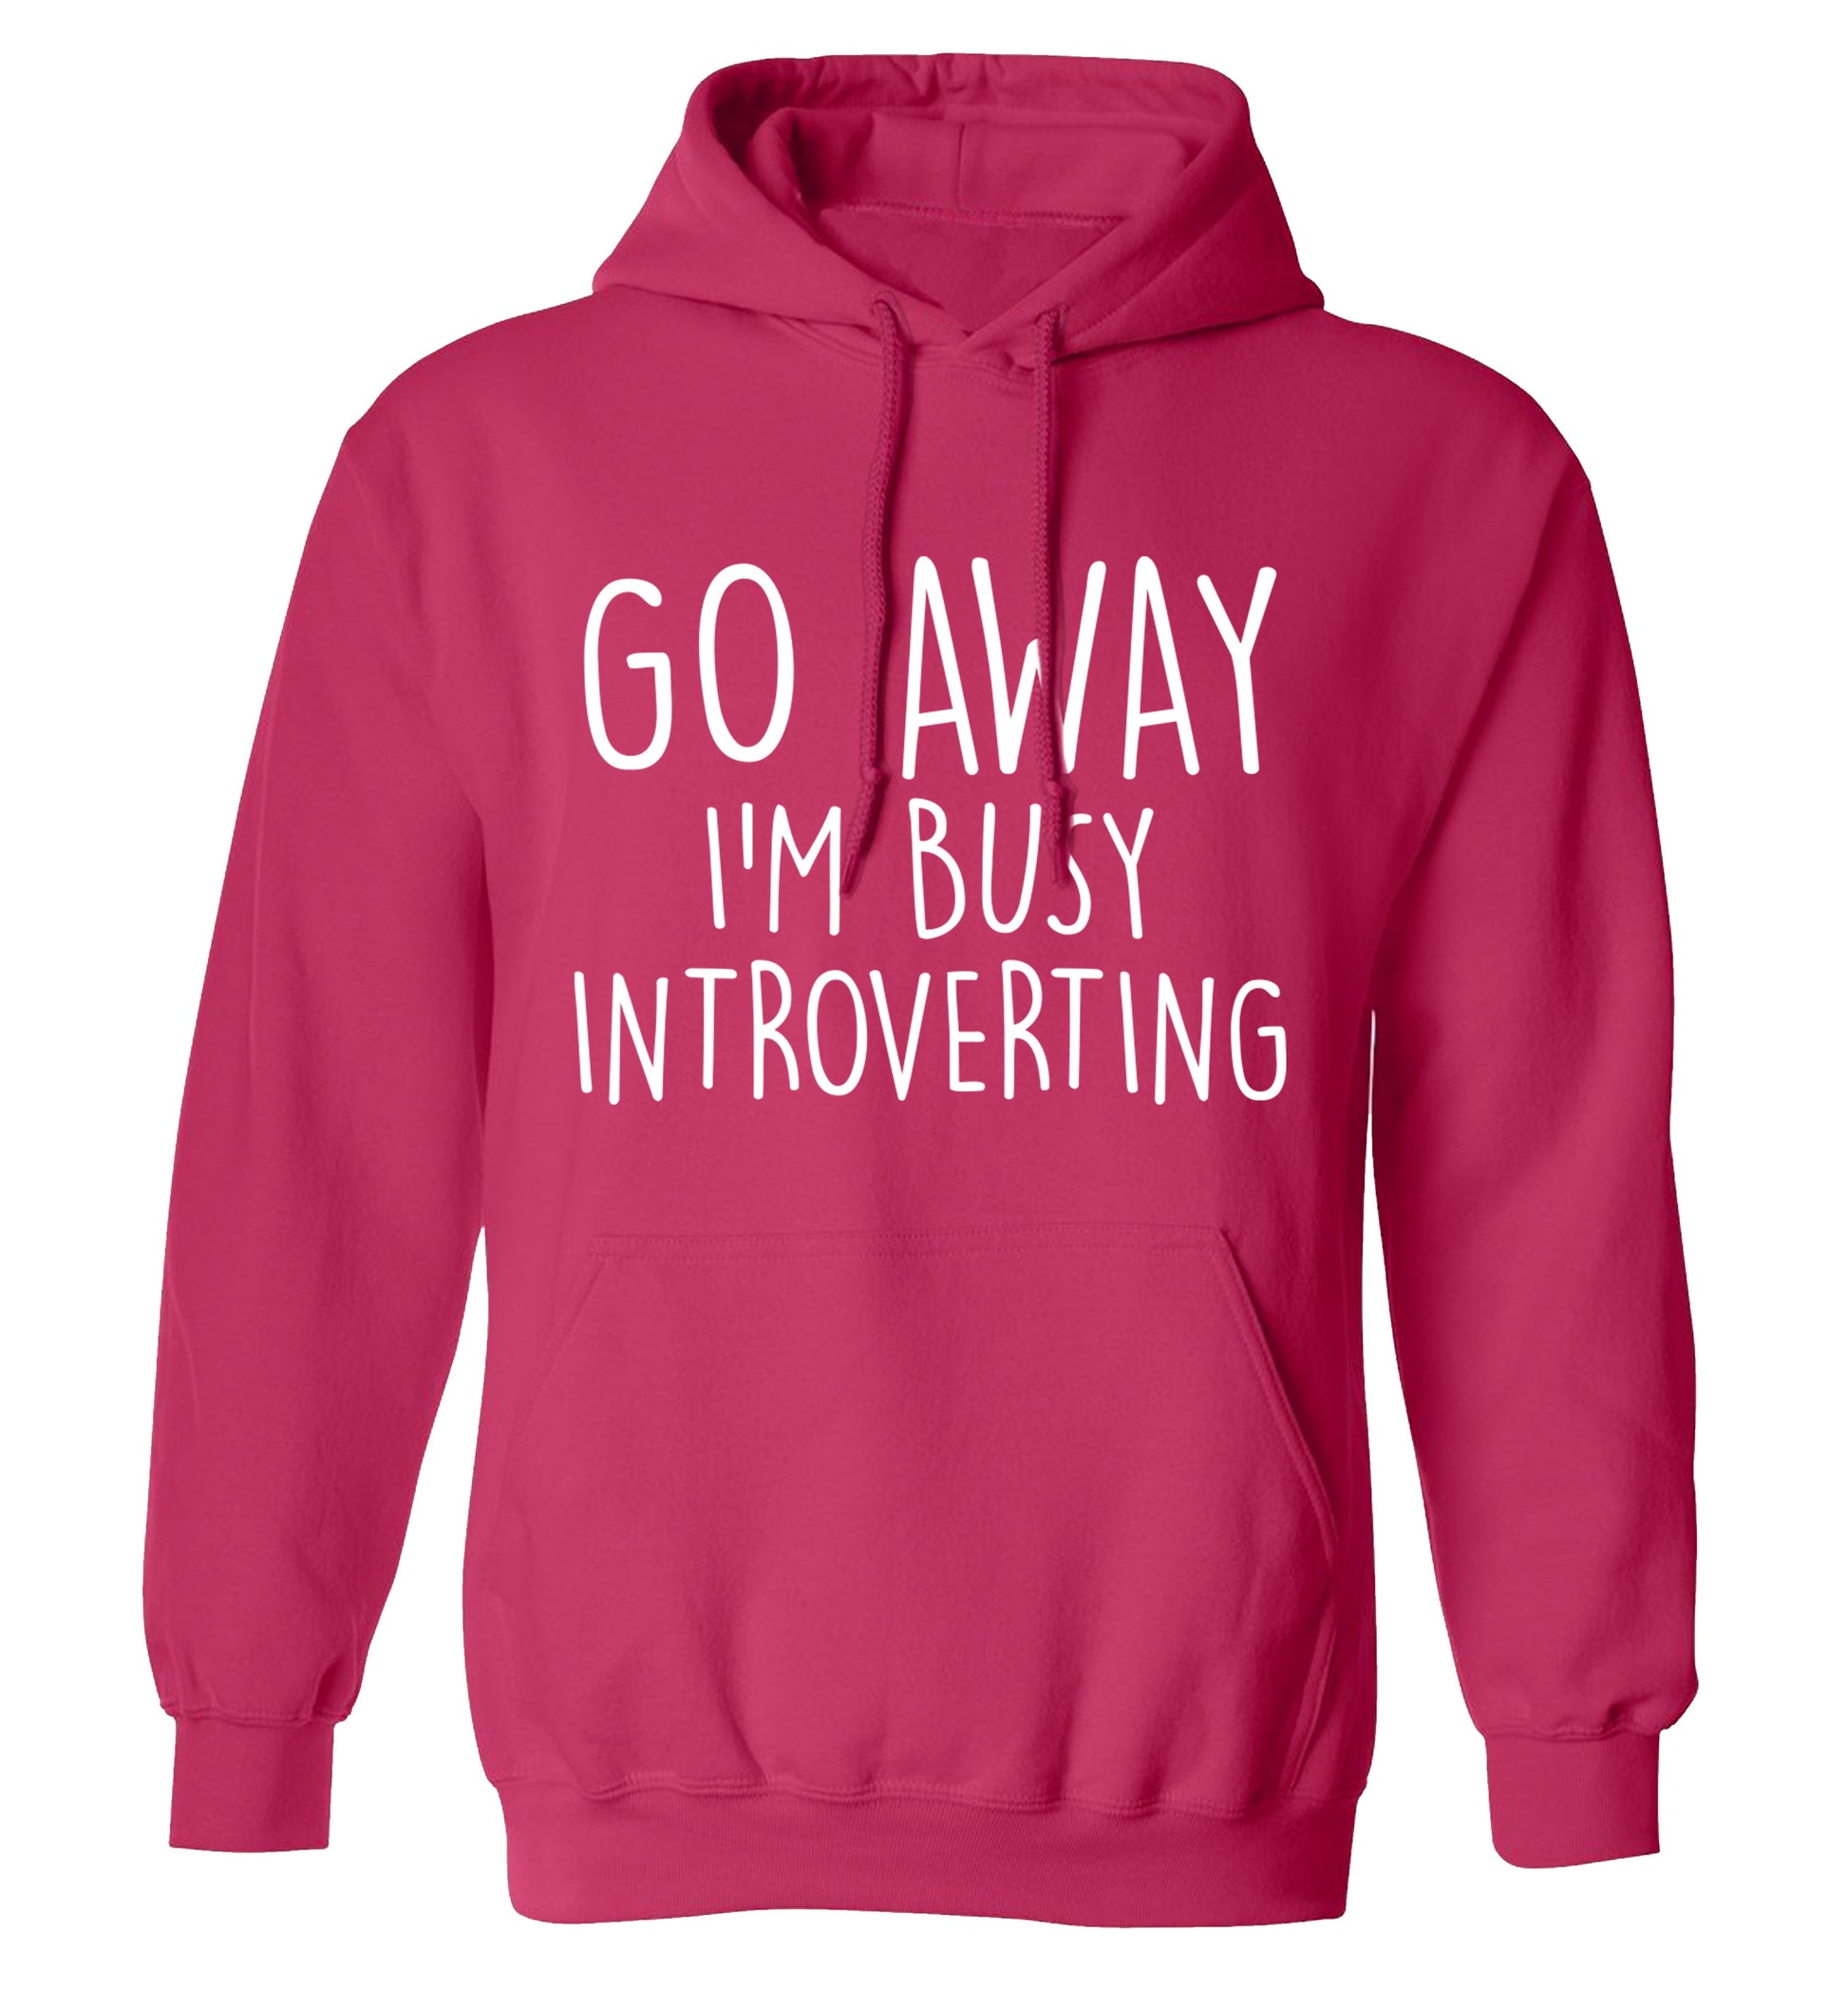 Go away I'm busy introverting adults unisex pink hoodie 2XL